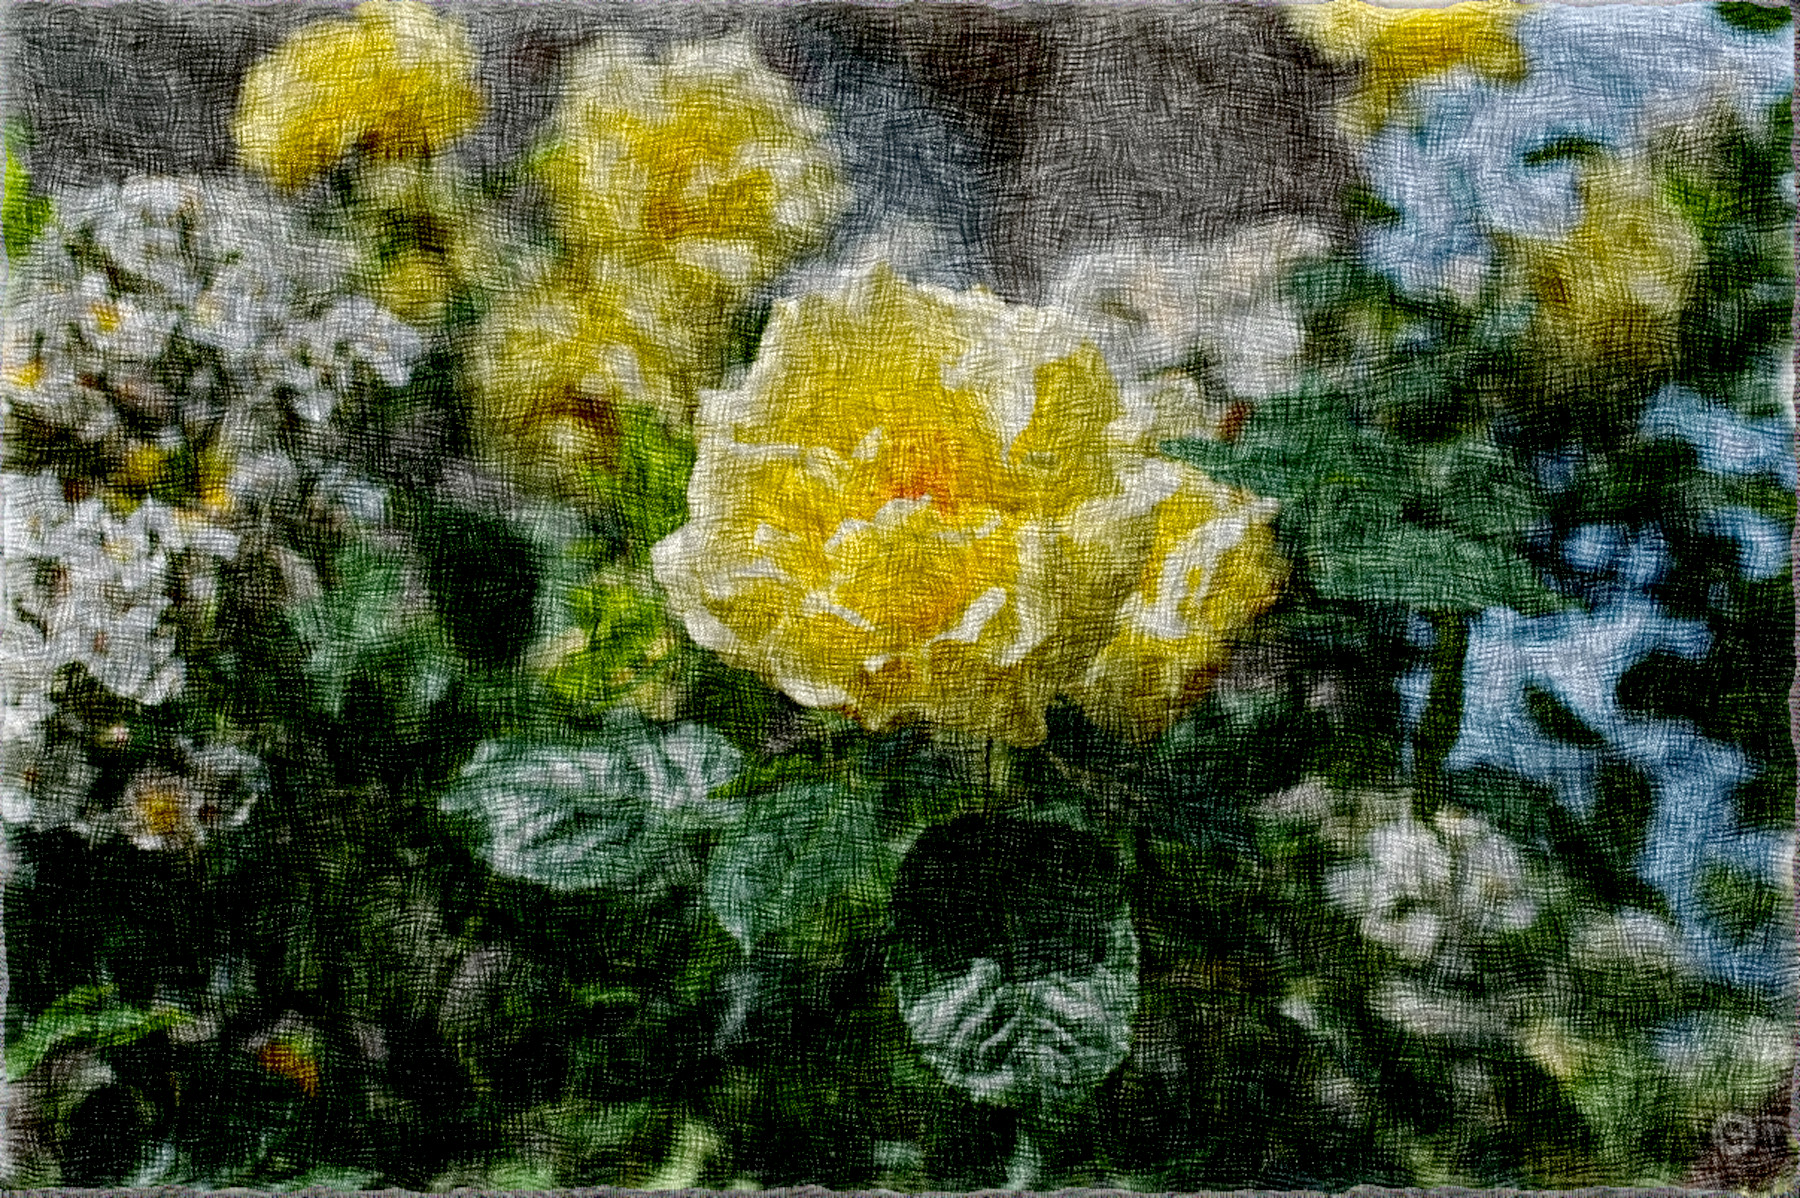 Background_with_Yellow_Roses_DN_Simple_Graphics_PaintOnHandmadeCanvas_B.jpg